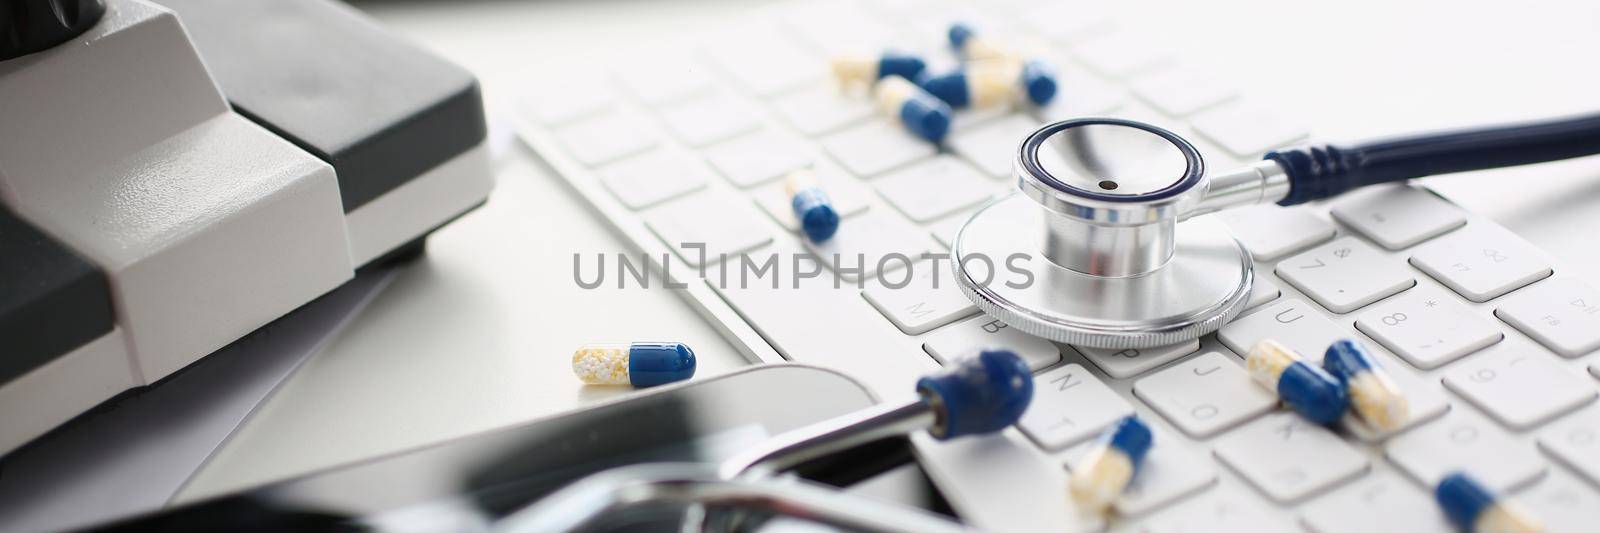 Close-up of medical worker desk, mess on working place, stethoscope tool, scattered pills on keyboard, locked tablet screen. Chaos, messy, slovenliness, medicine, office concept